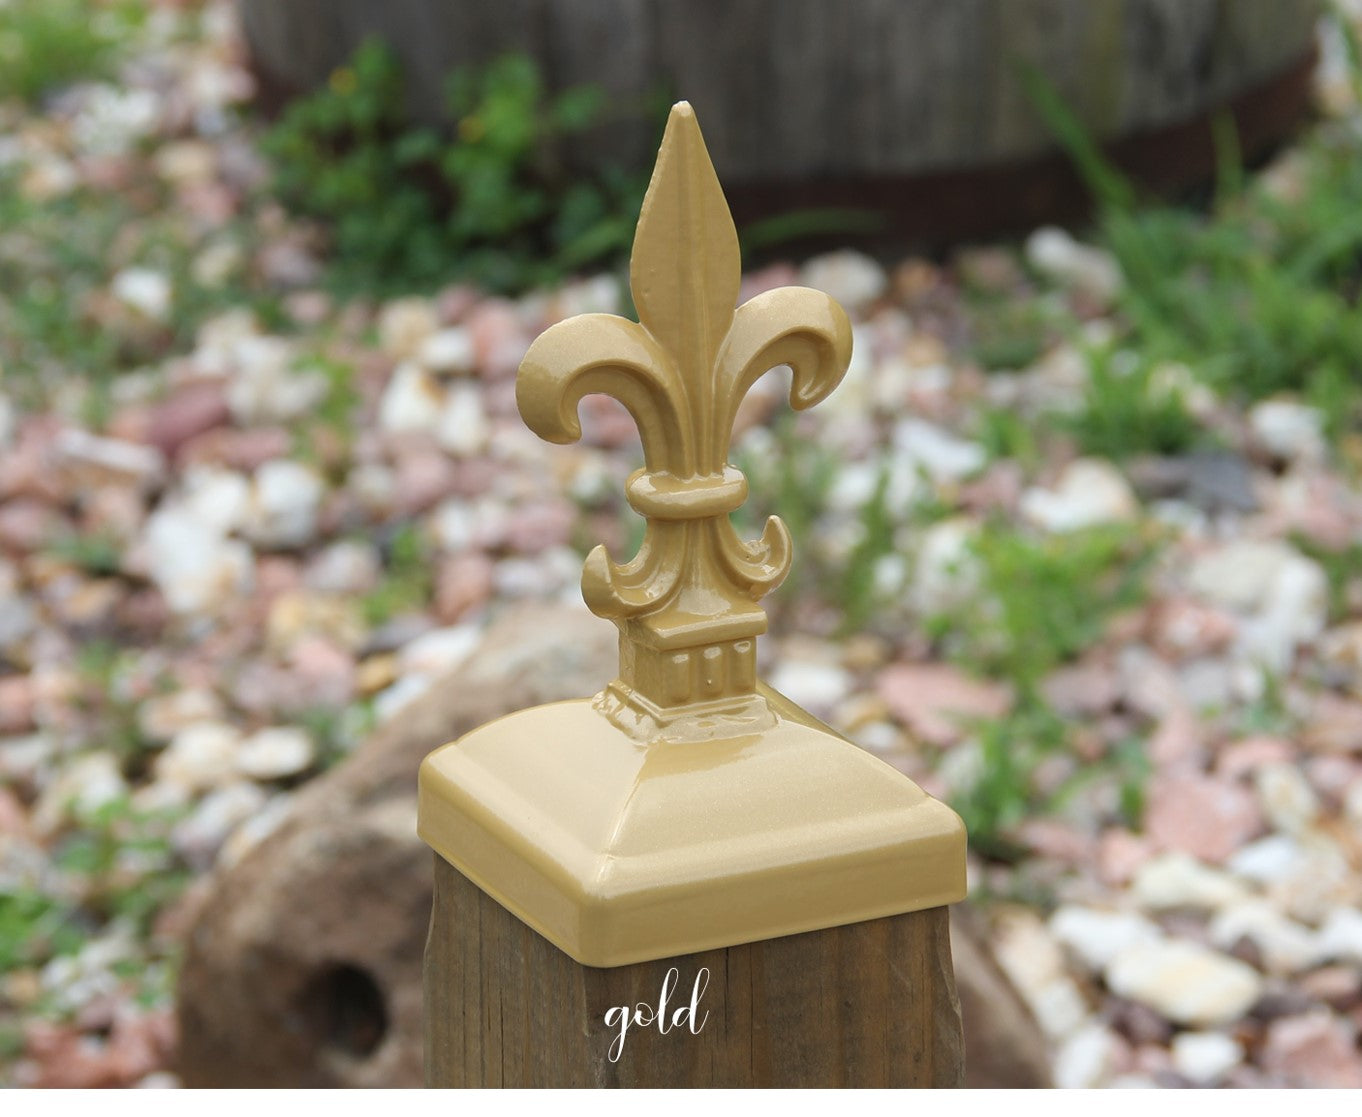 4x4 Fleur-De-Lis Fence Post Cap - Madison Iron and Wood - Post Cap - metal outdoor decor - Steel deocrations - american made products - veteran owned business products - fencing decorations - fencing supplies - custom wall decorations - personalized wall signs - steel - decorative post caps - steel post caps - metal post caps - brackets - structural brackets - home improvement - easter - easter decorations - easter gift - easter yard decor